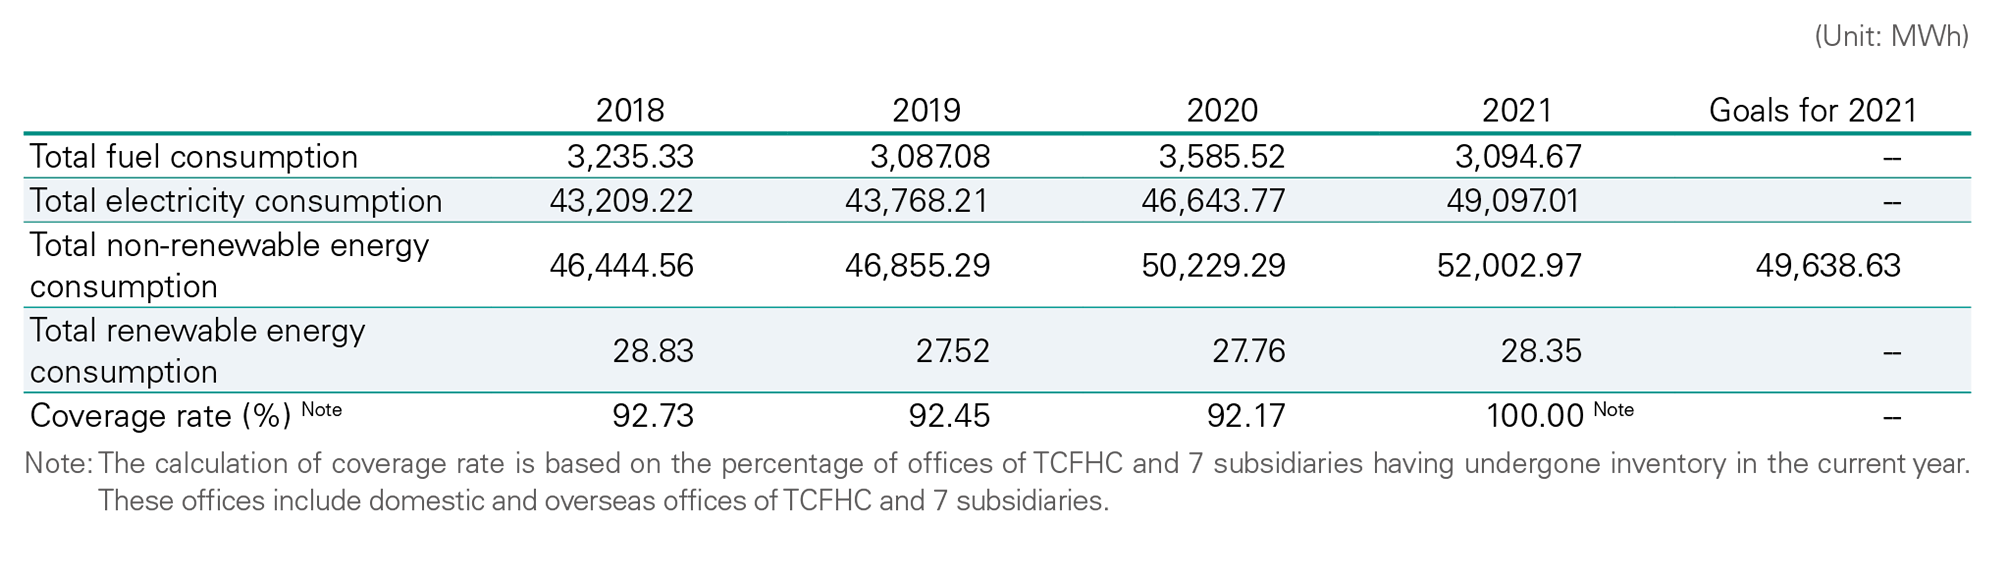 TCFHC Group Energy Consumption in the Past 4 Years